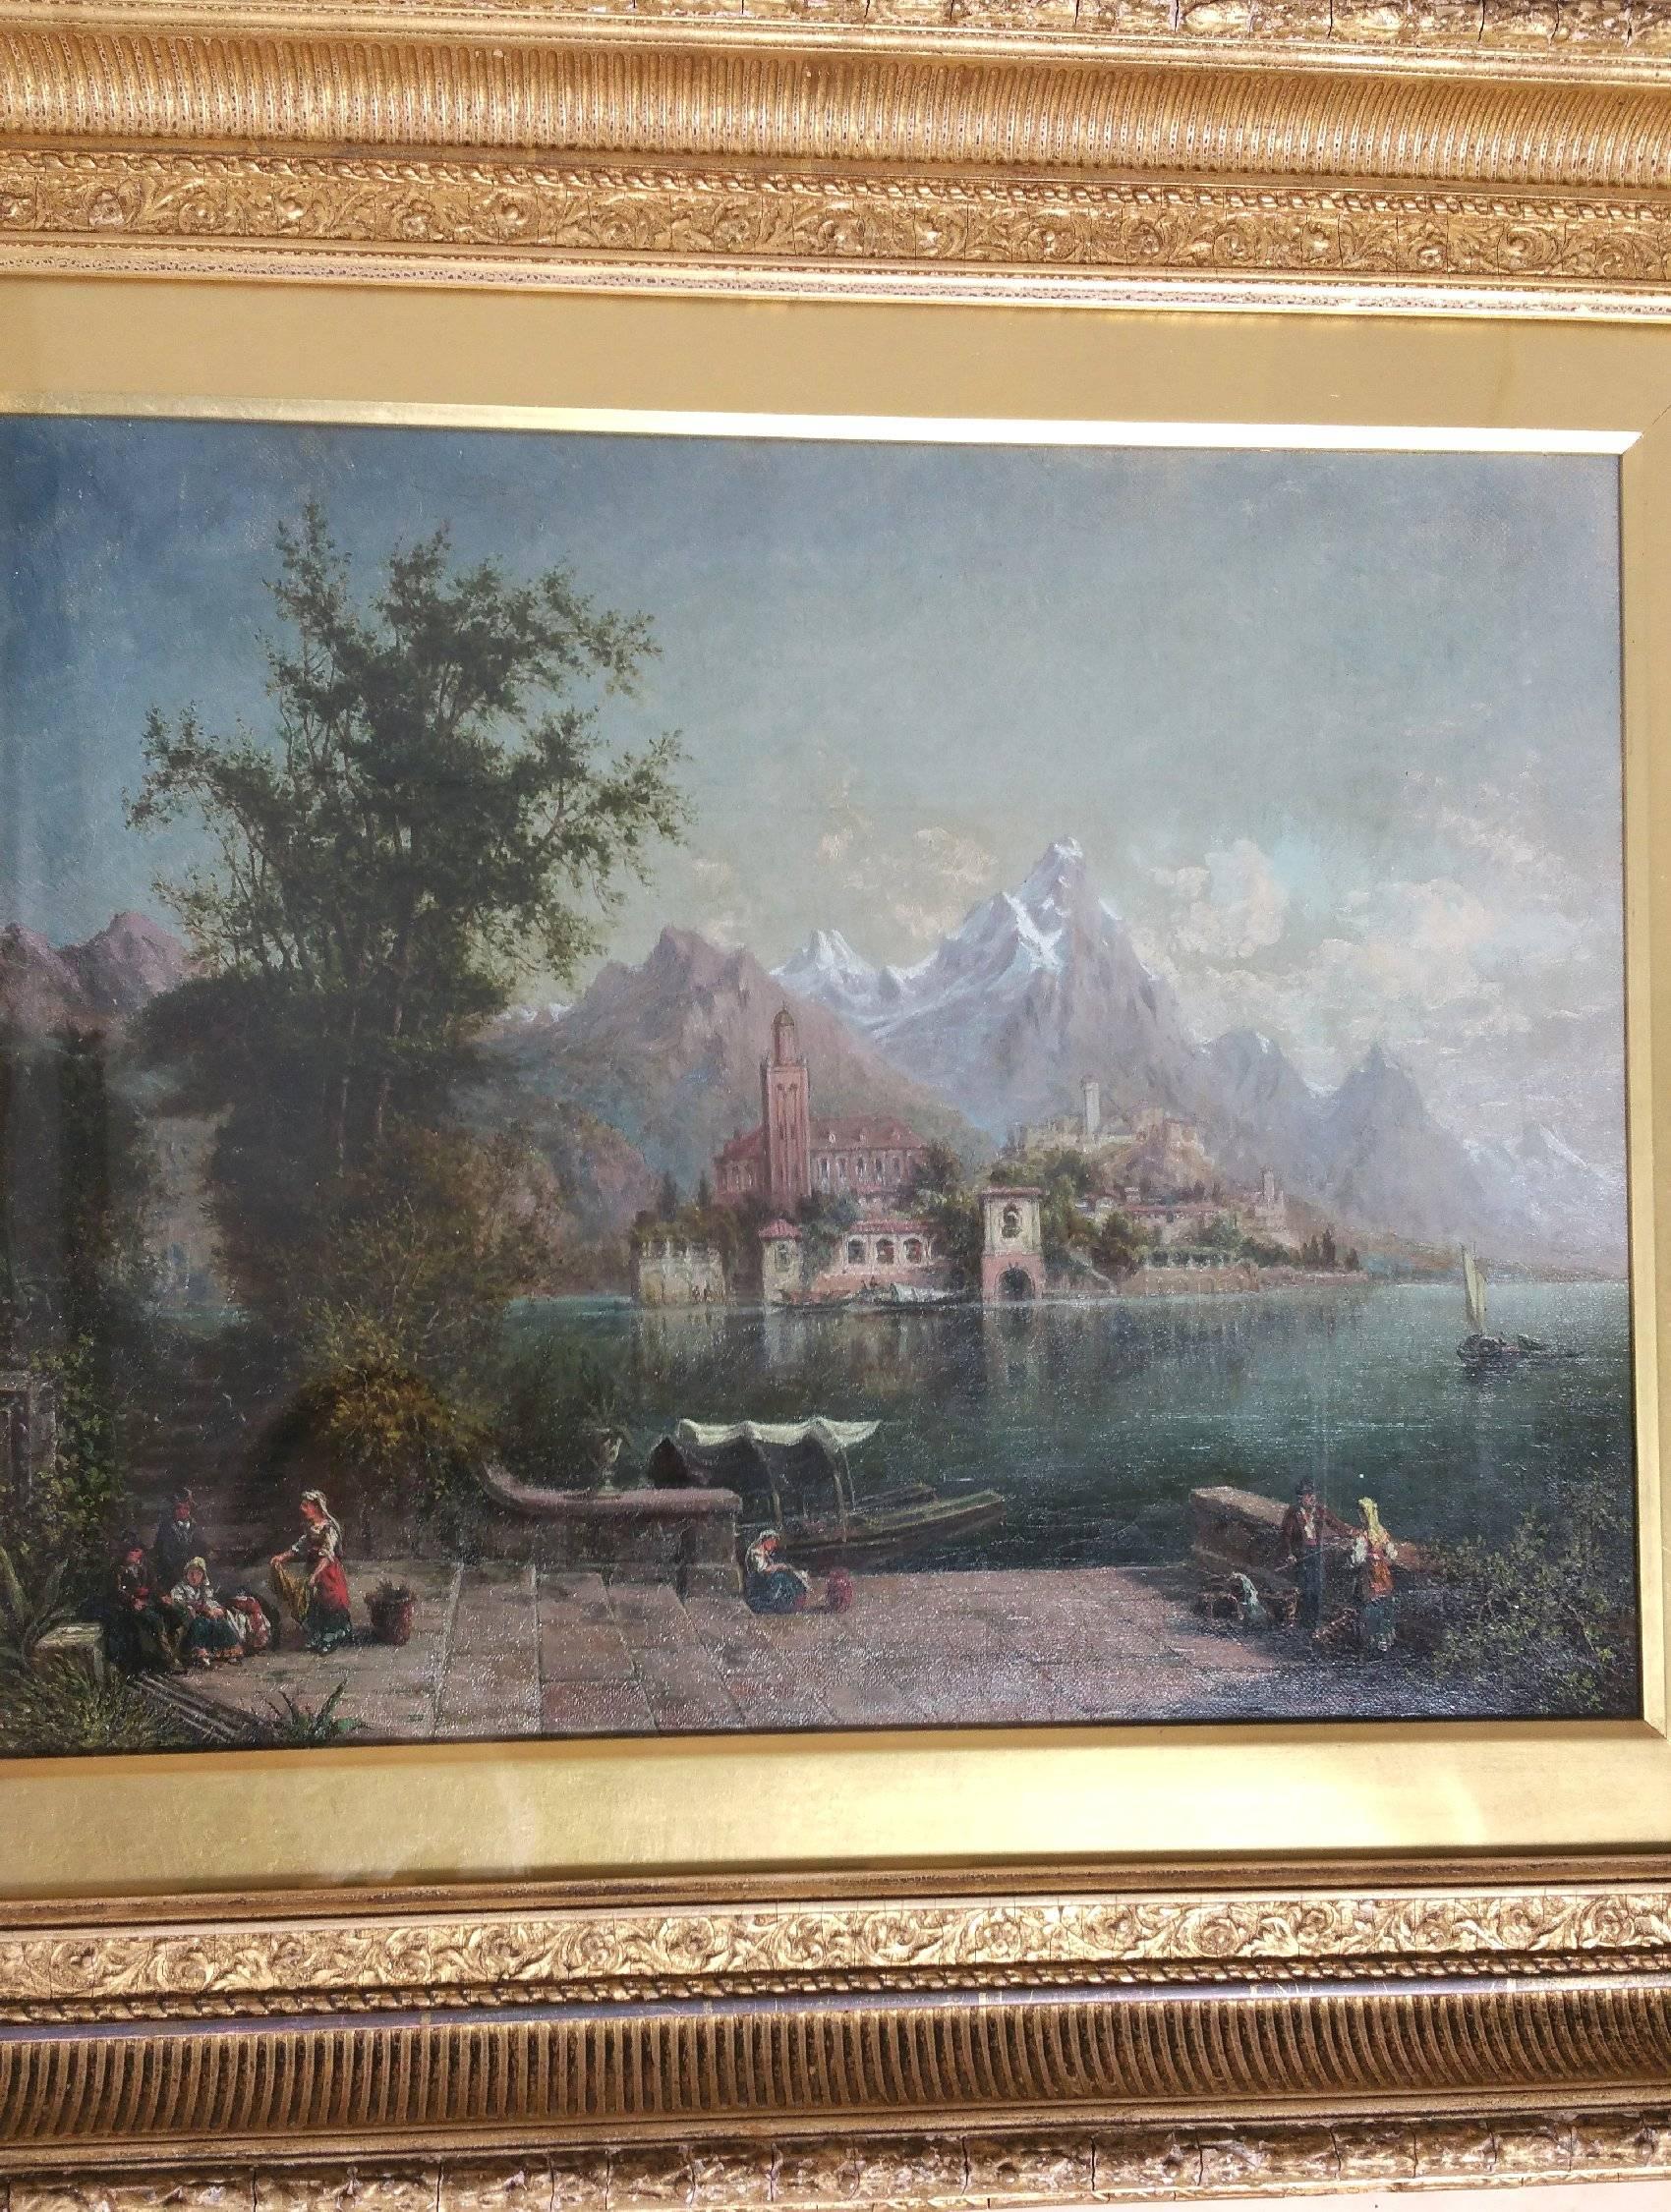 This elegant and sublime landscape oil on canvas is of an Italian lake scene, detailed with figures, boats and mountains in the distance, painted by John Bell, a prominent painter of the period. The painting is signed and dated 1876, with written